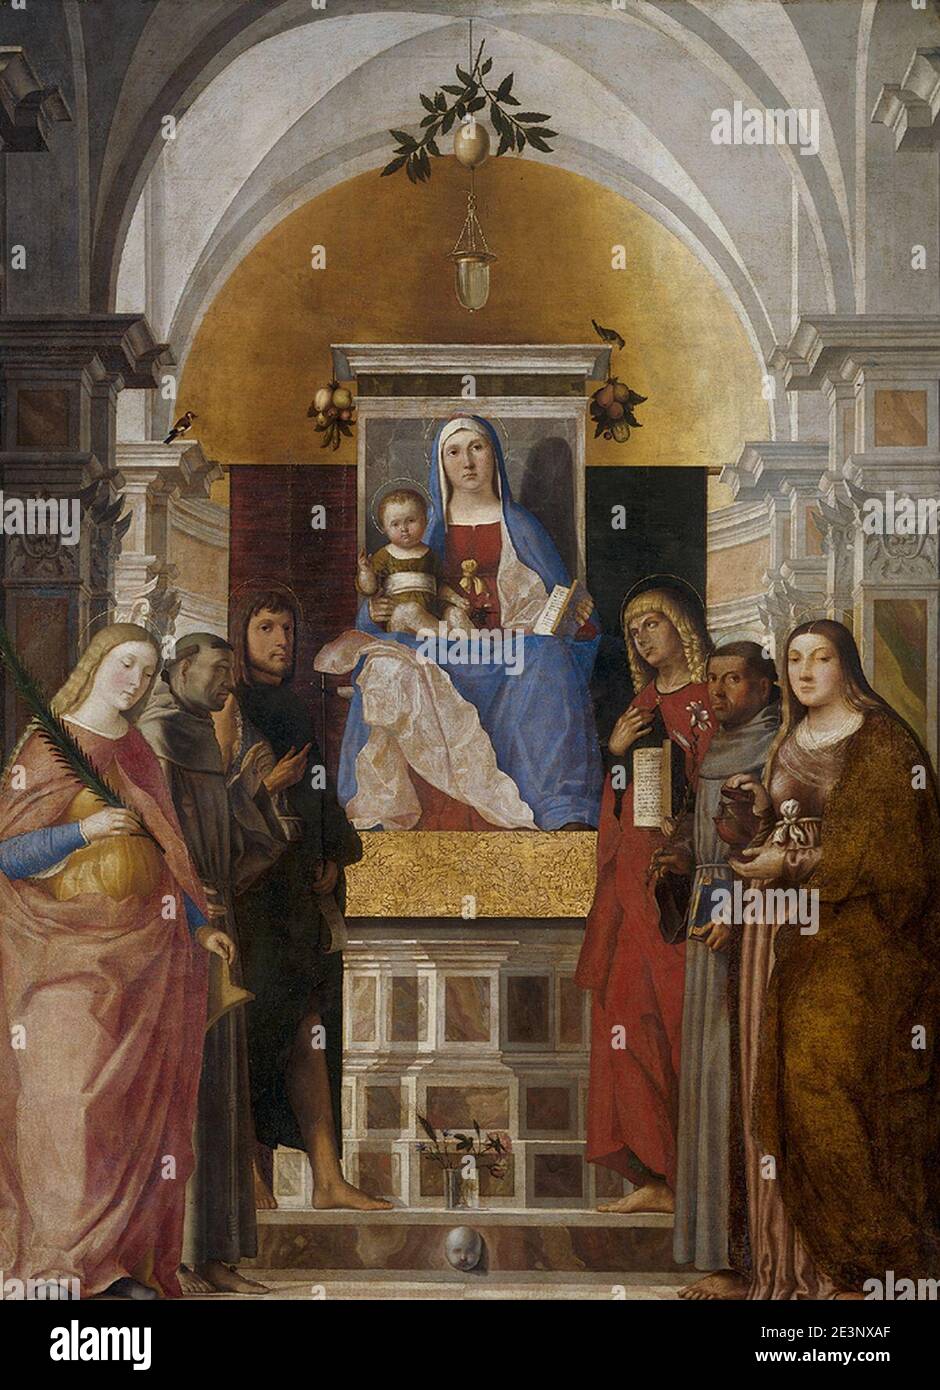 Marcello Fogolino - Madonna and Child, Enthroned, with Six Saints - 347 - Stock Photo